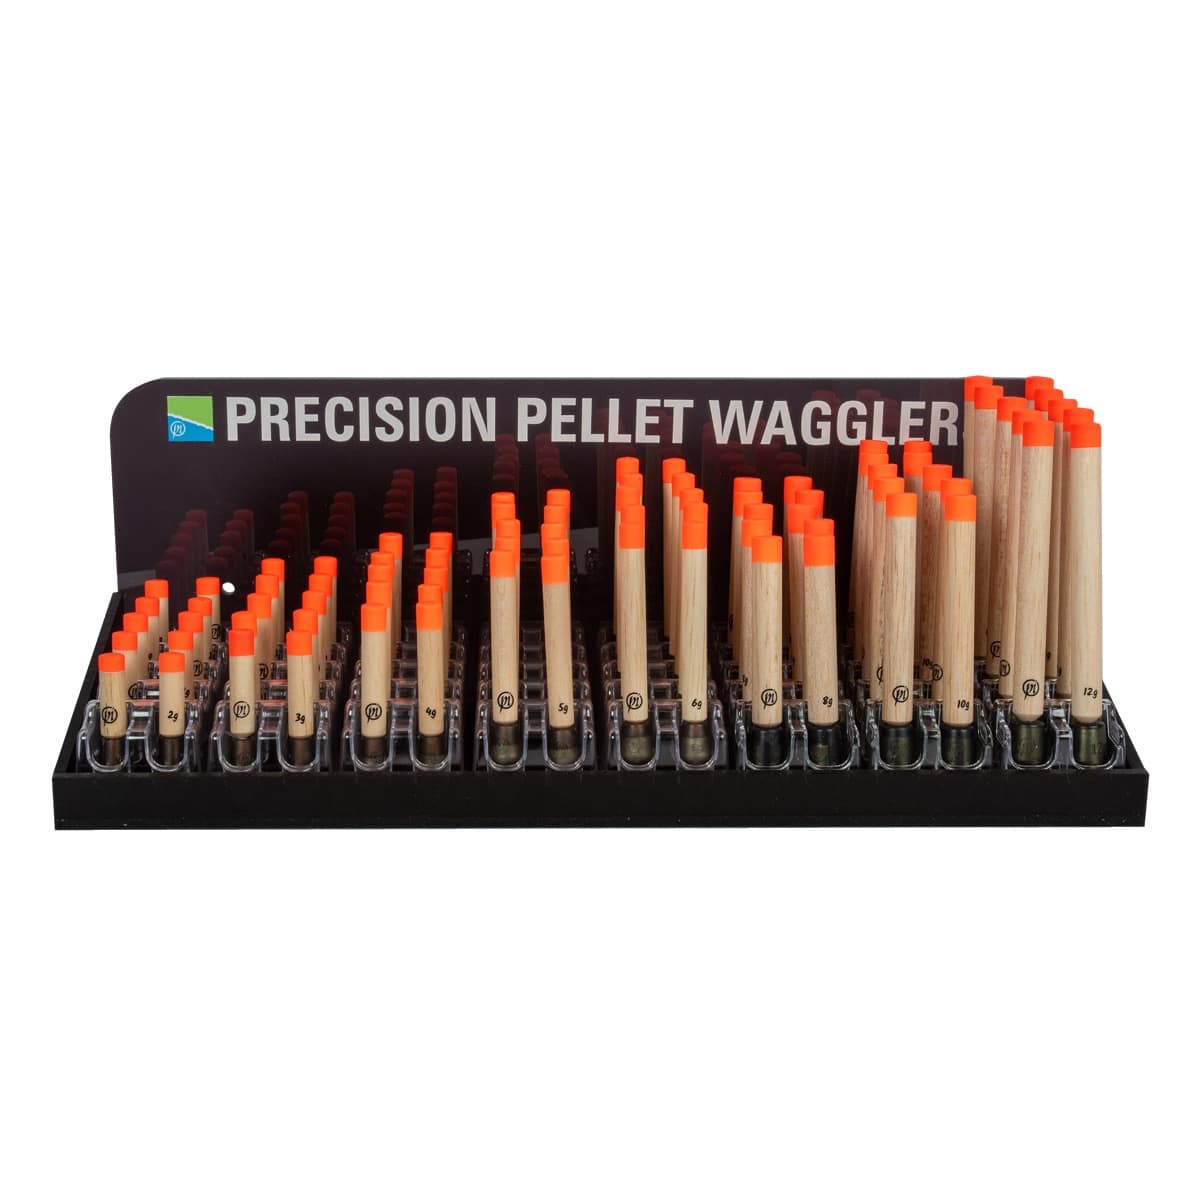 PRECISION PELLET WAGGLERS